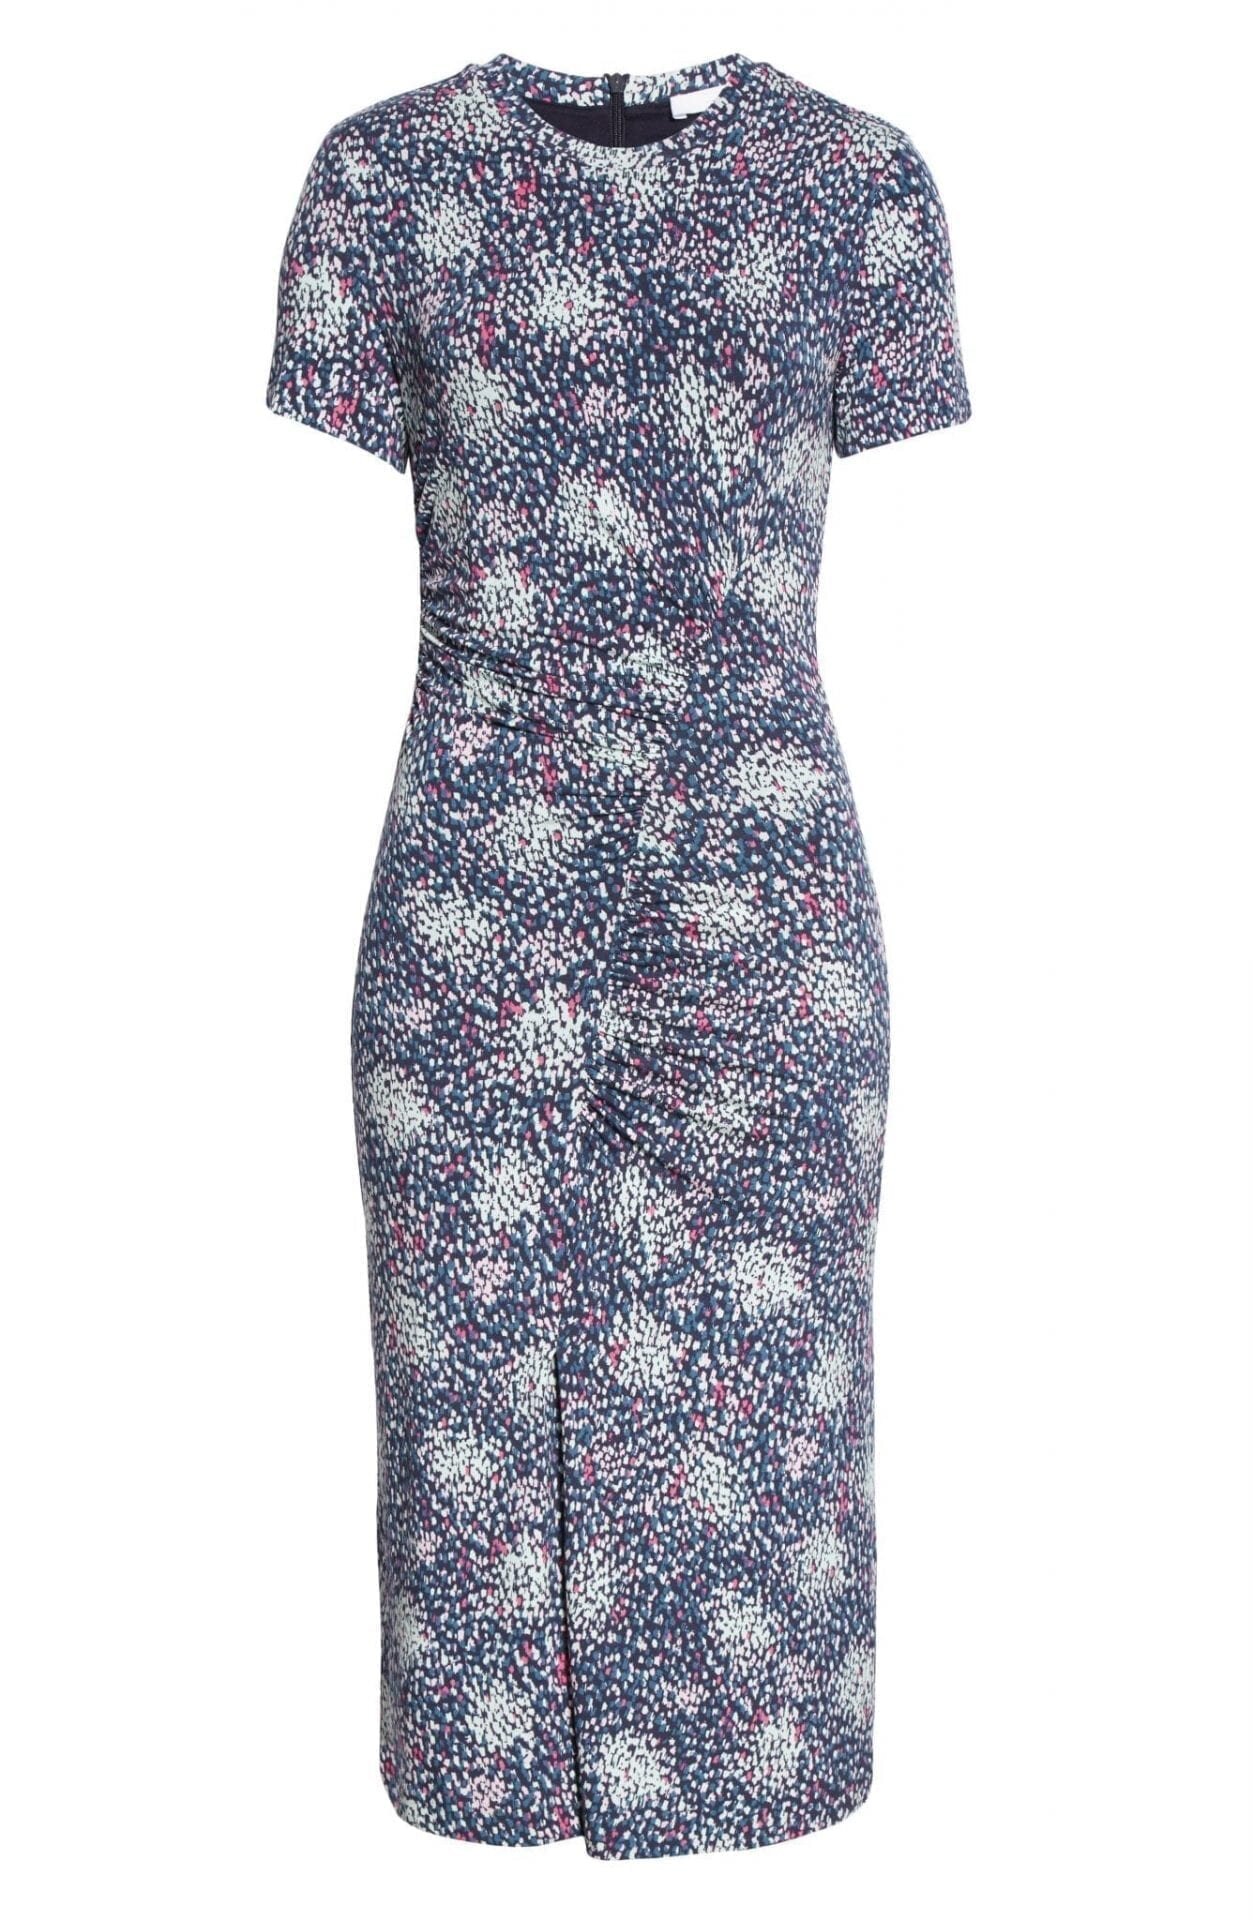 BOSS-Enice-Confetti-Print-Ruched-Jersey-Dress-2-scaled-scaled.jpeg